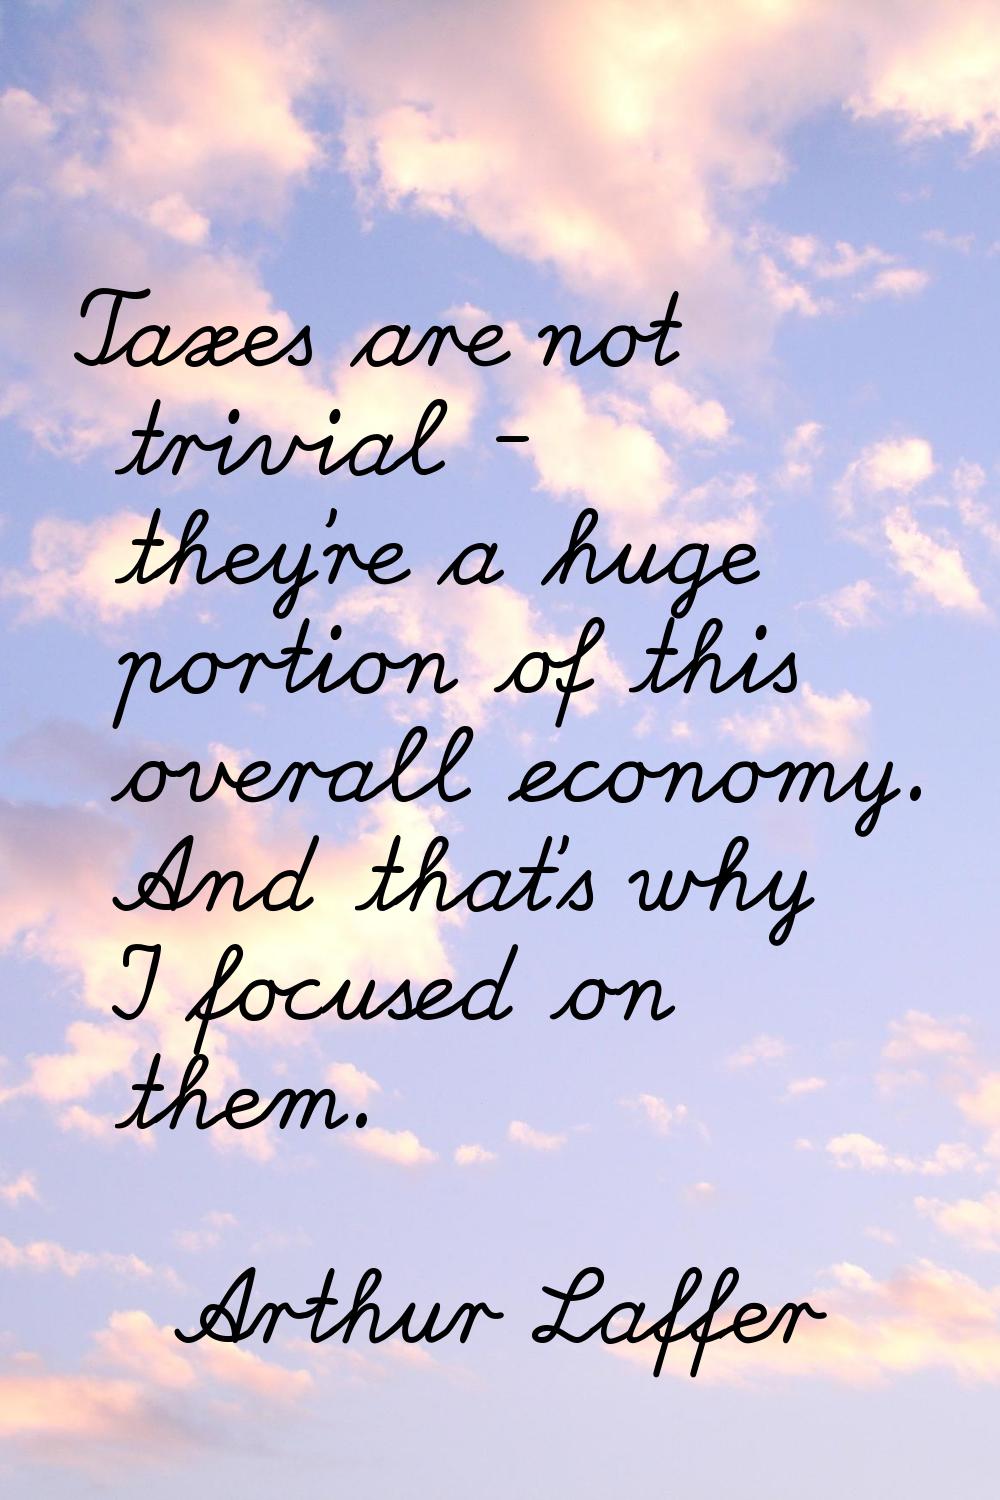 Taxes are not trivial - they're a huge portion of this overall economy. And that's why I focused on